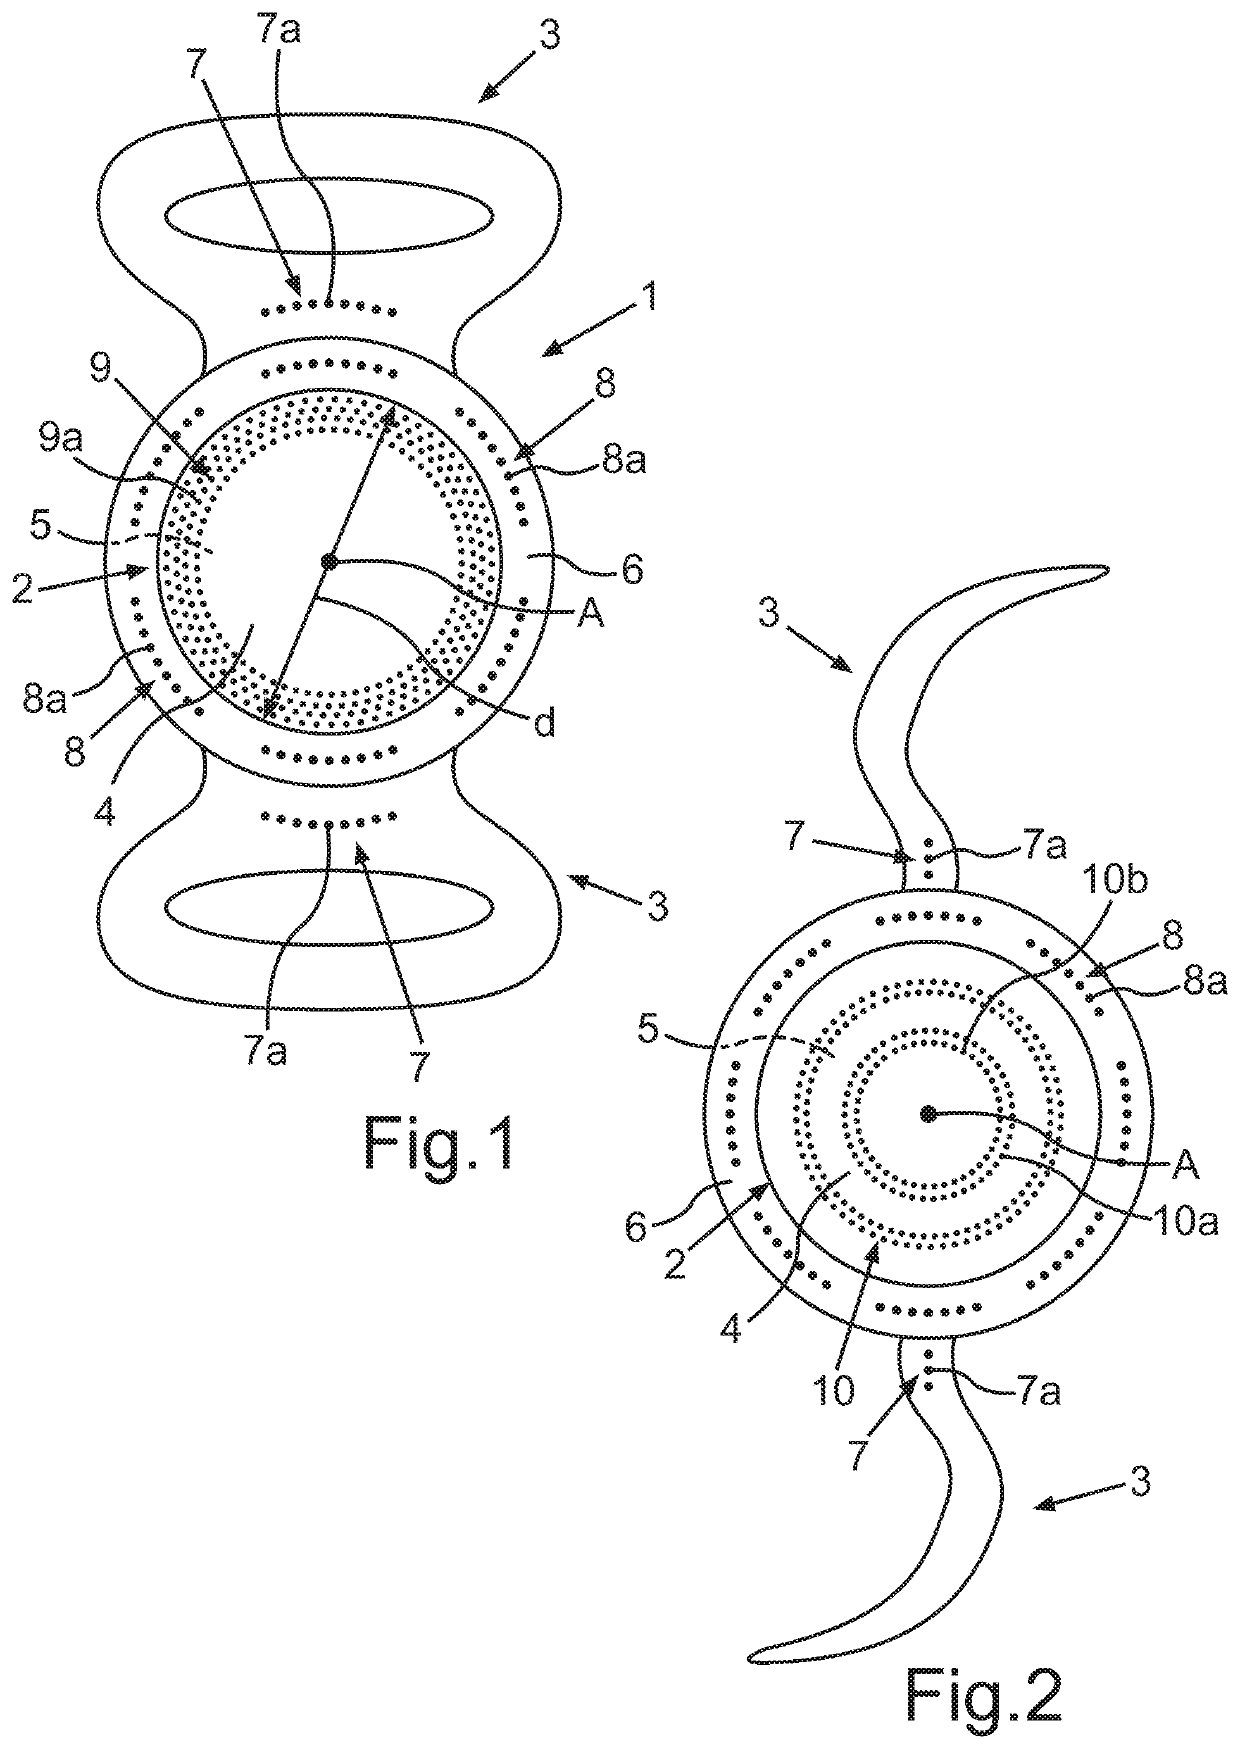 Artificial eye lens having medicine repository formed therein, and method for producing an artificial eye lens